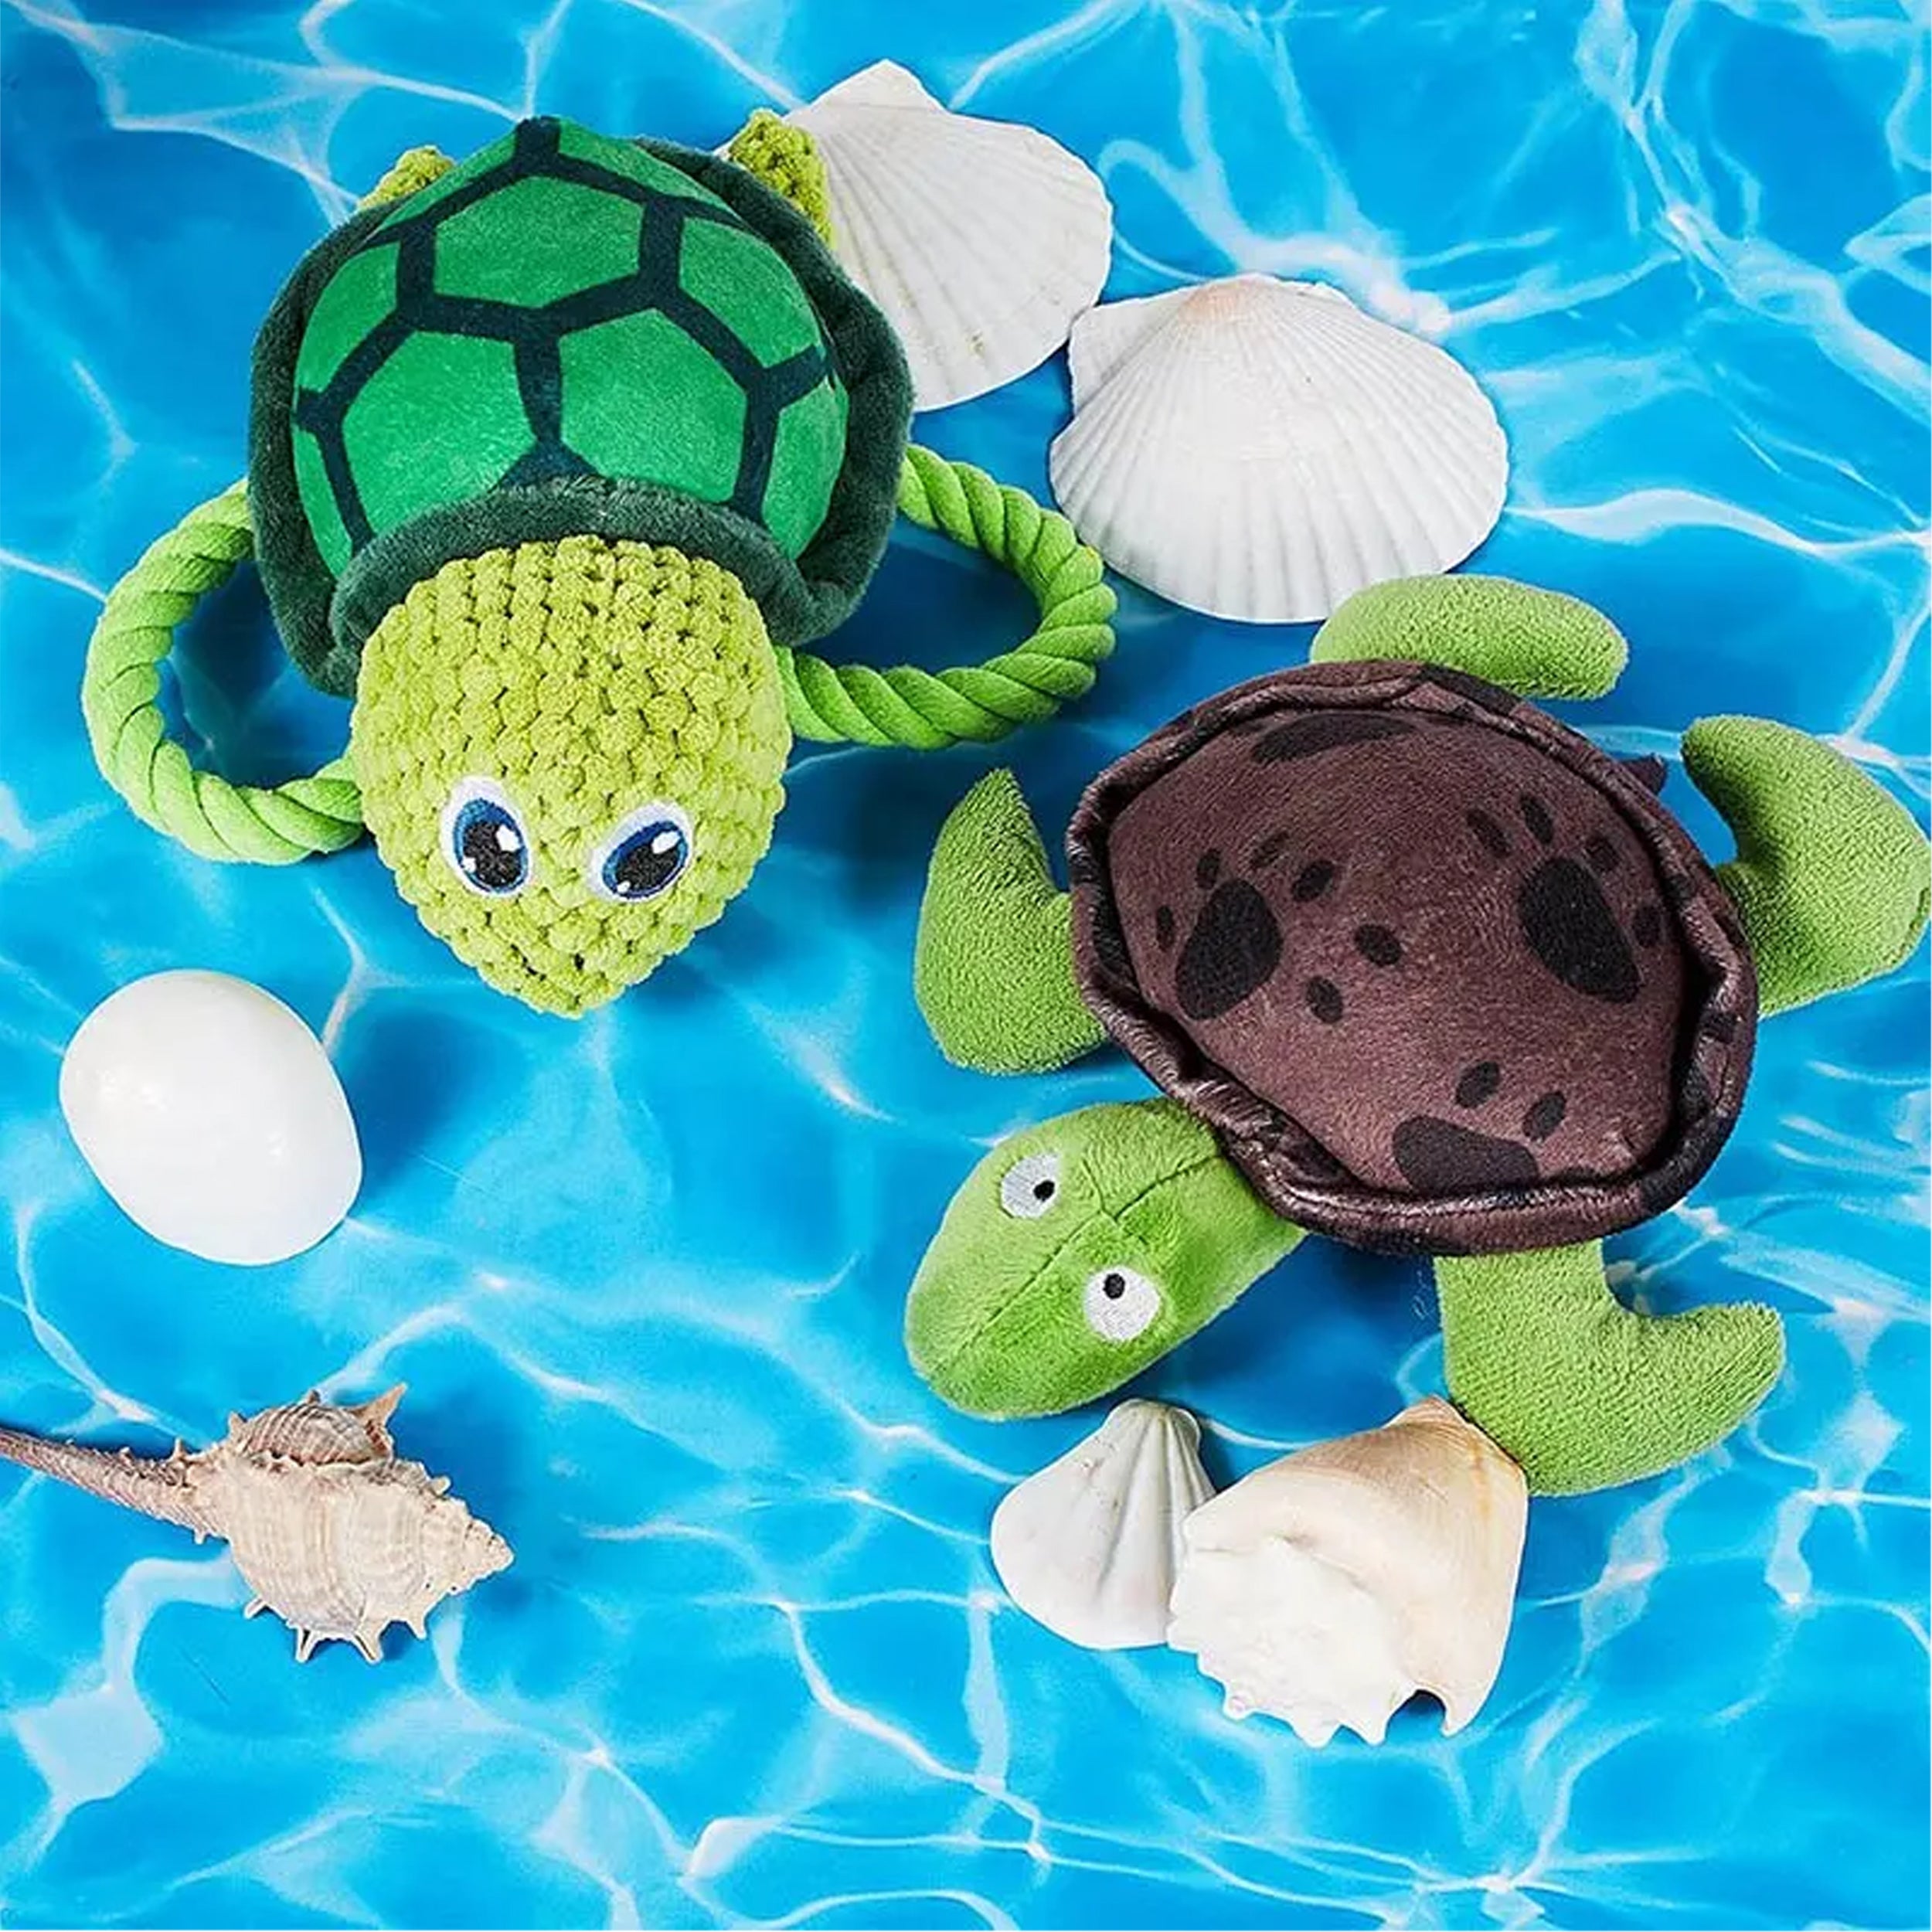 Turtle Pet Supplies - Vocal Bite-Resistant Stuffed Squeaky Dog Chew Toy for Endless Playtime Fun